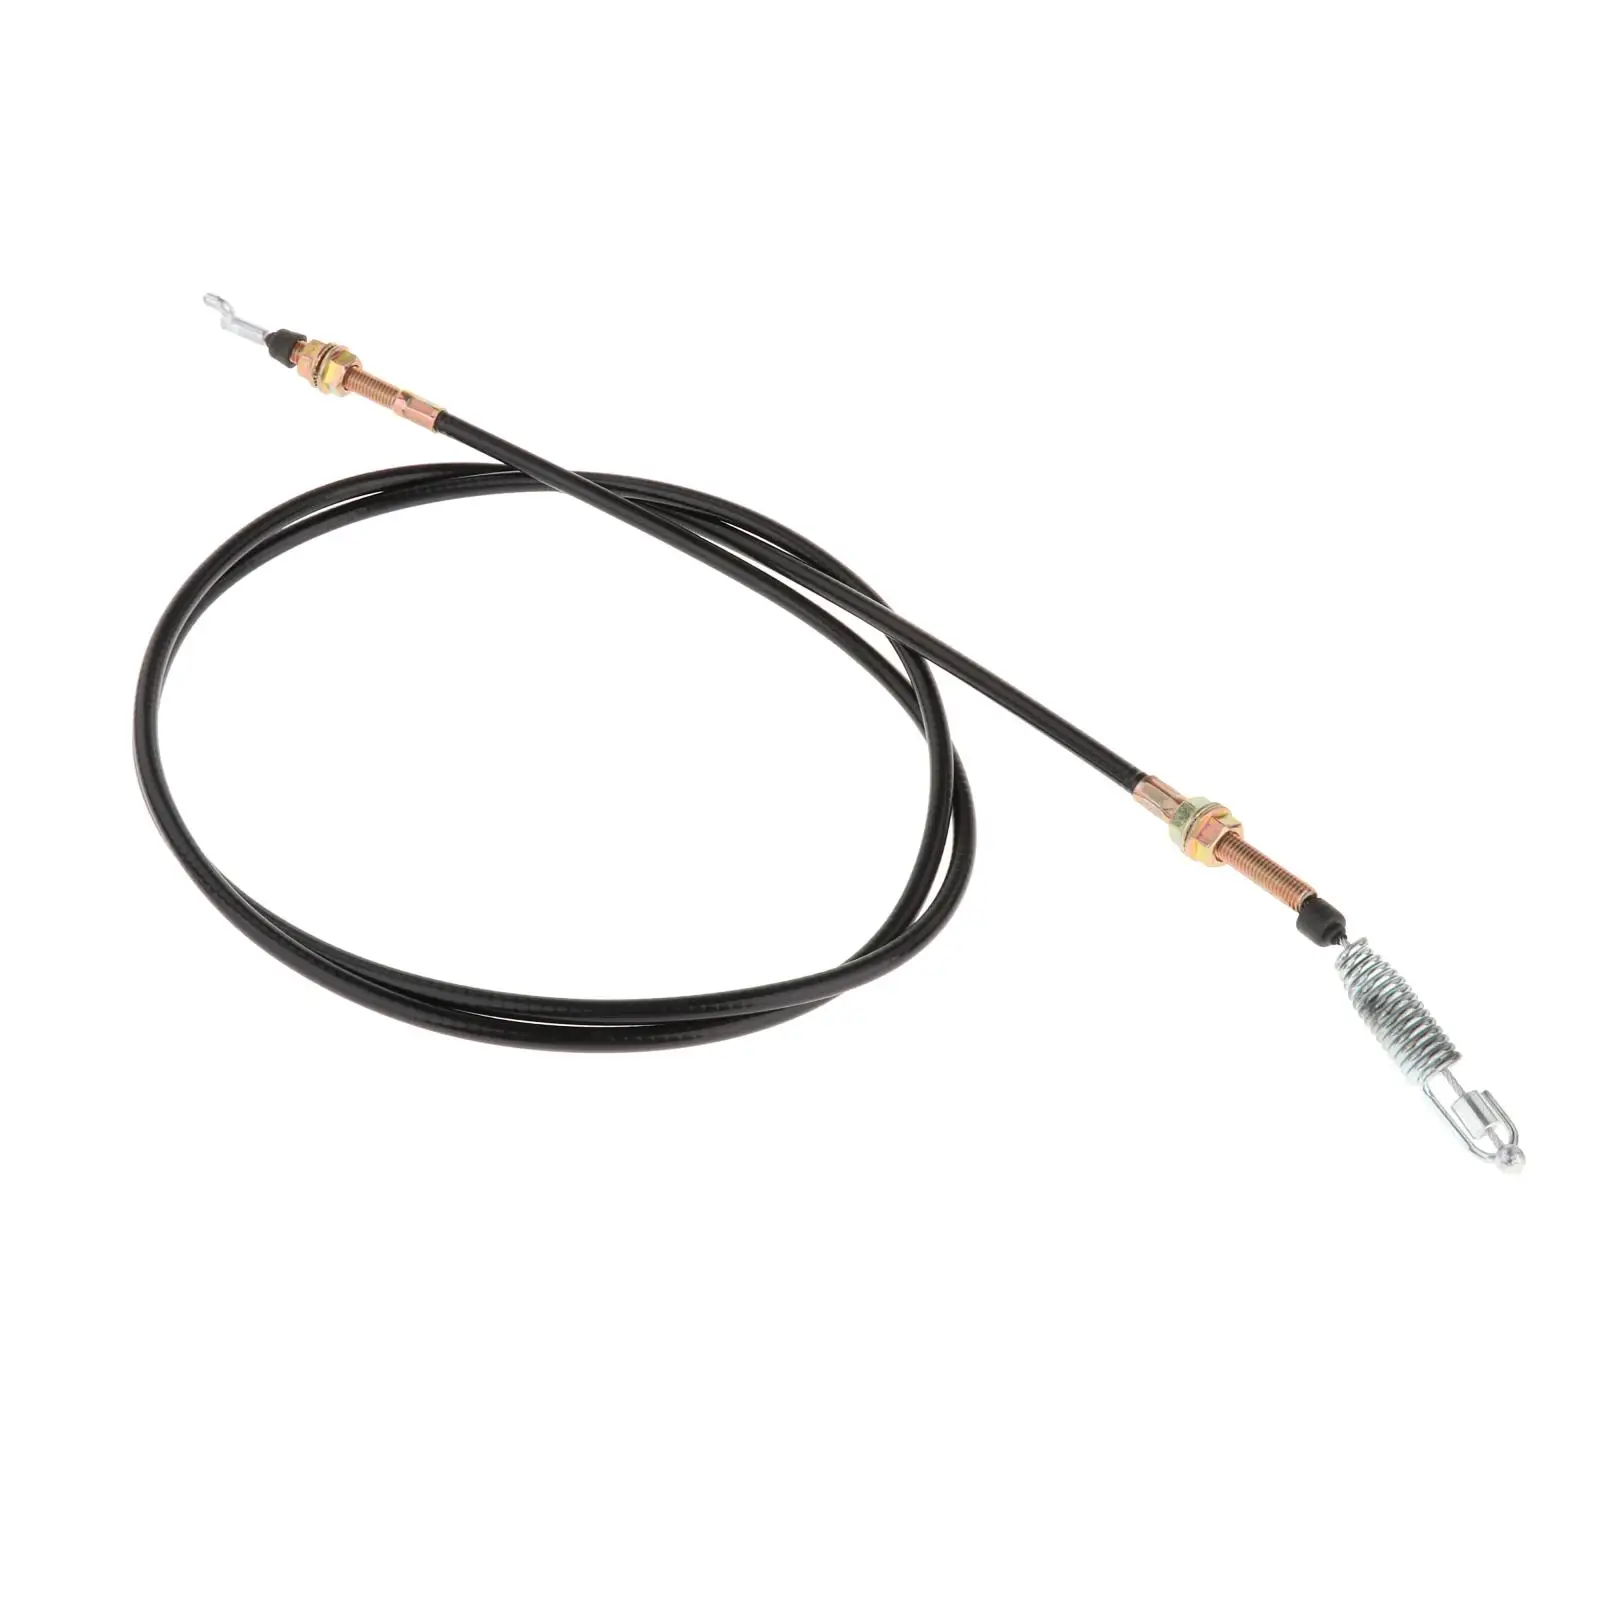 Shifter Cable 2-11082 for Chuck Wagon Go-Karts CW-11 CW-413, ,Easy to Install